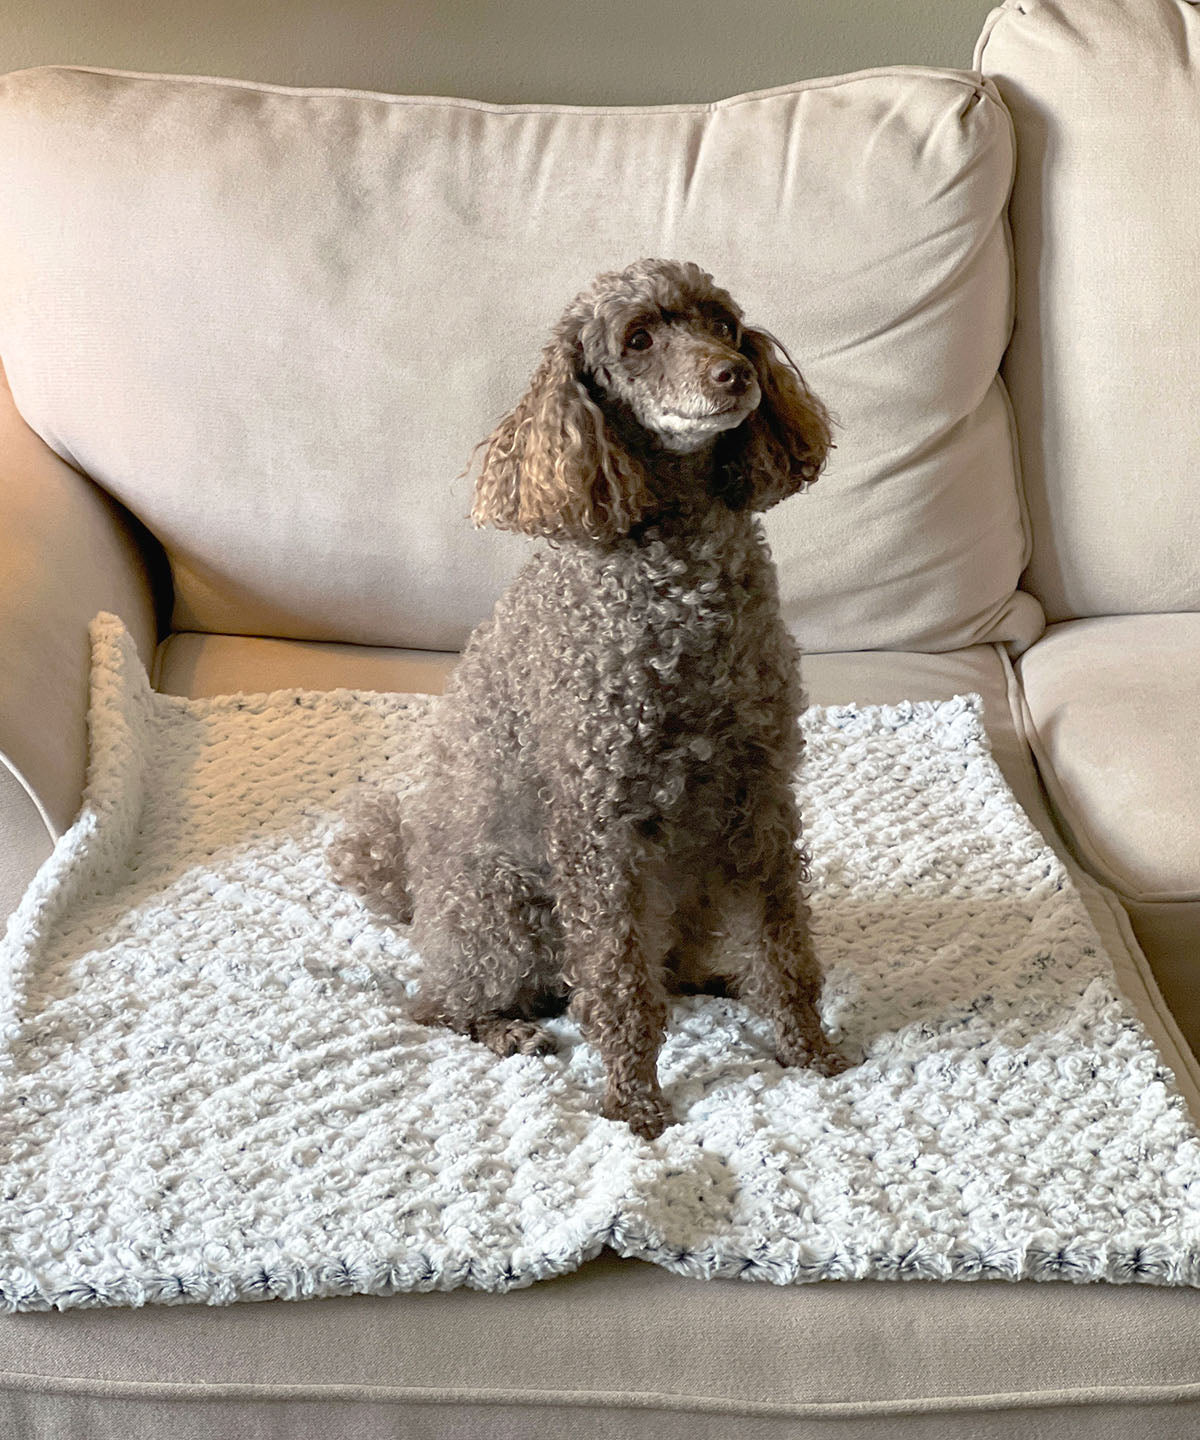 Dog and Pet Blanket - Poodle on throw in Rosebud Faux Fur - Handmade in the USA by Pandemonium Seattle